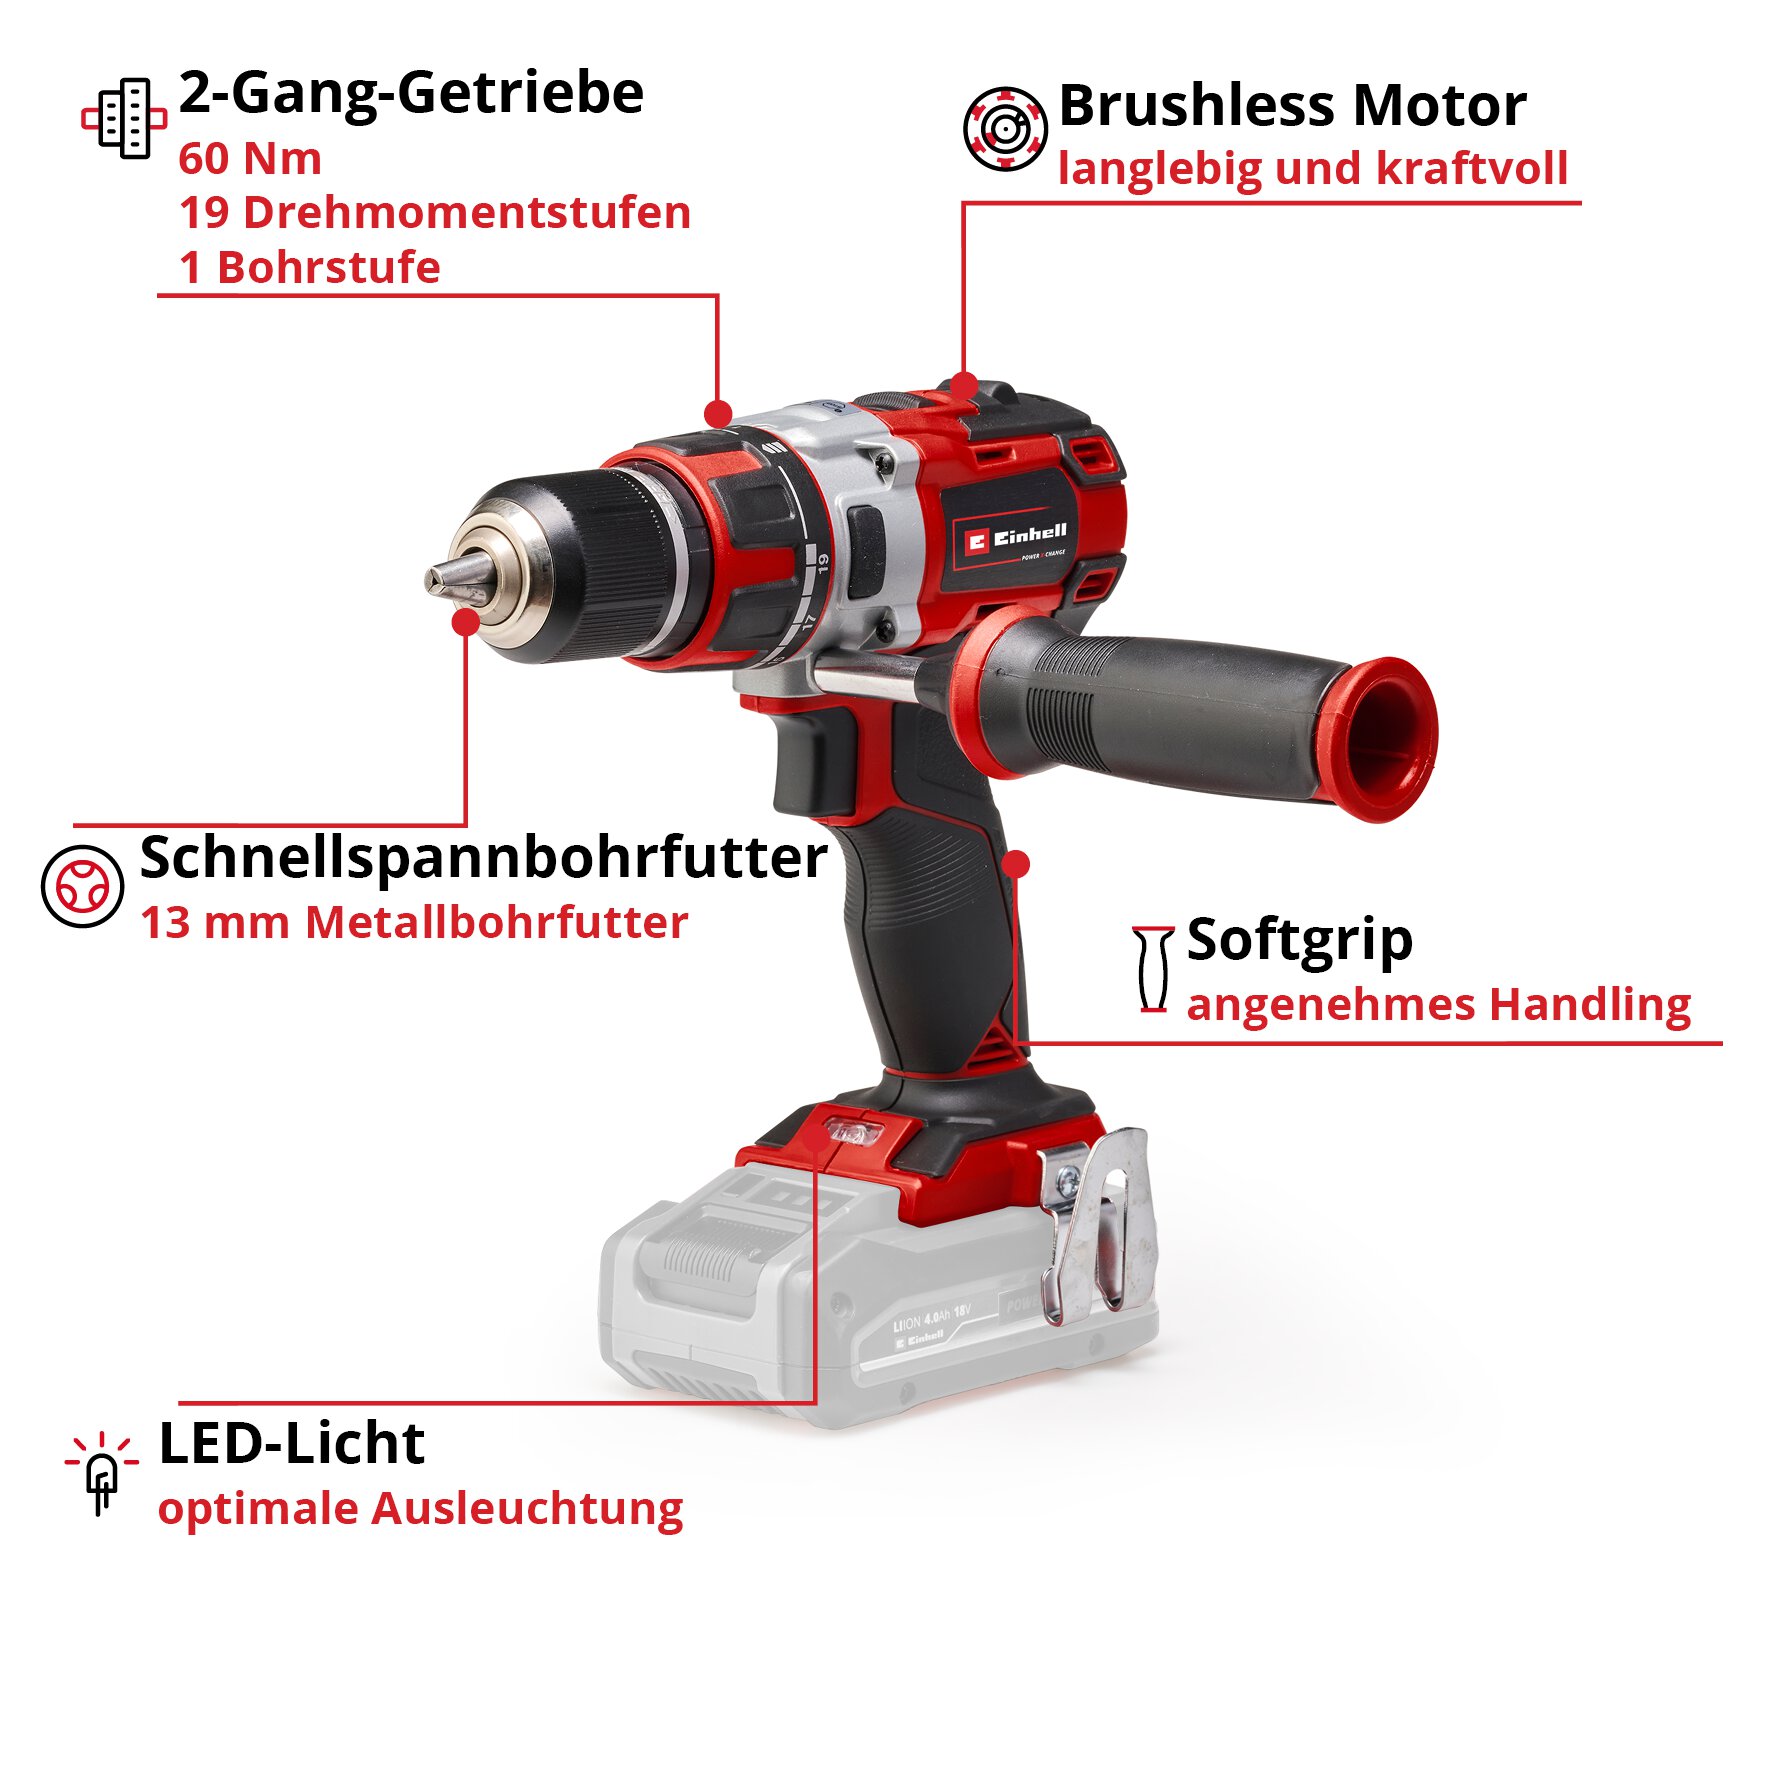 einhell-professional-cordless-drill-4513850-key_feature_image-001